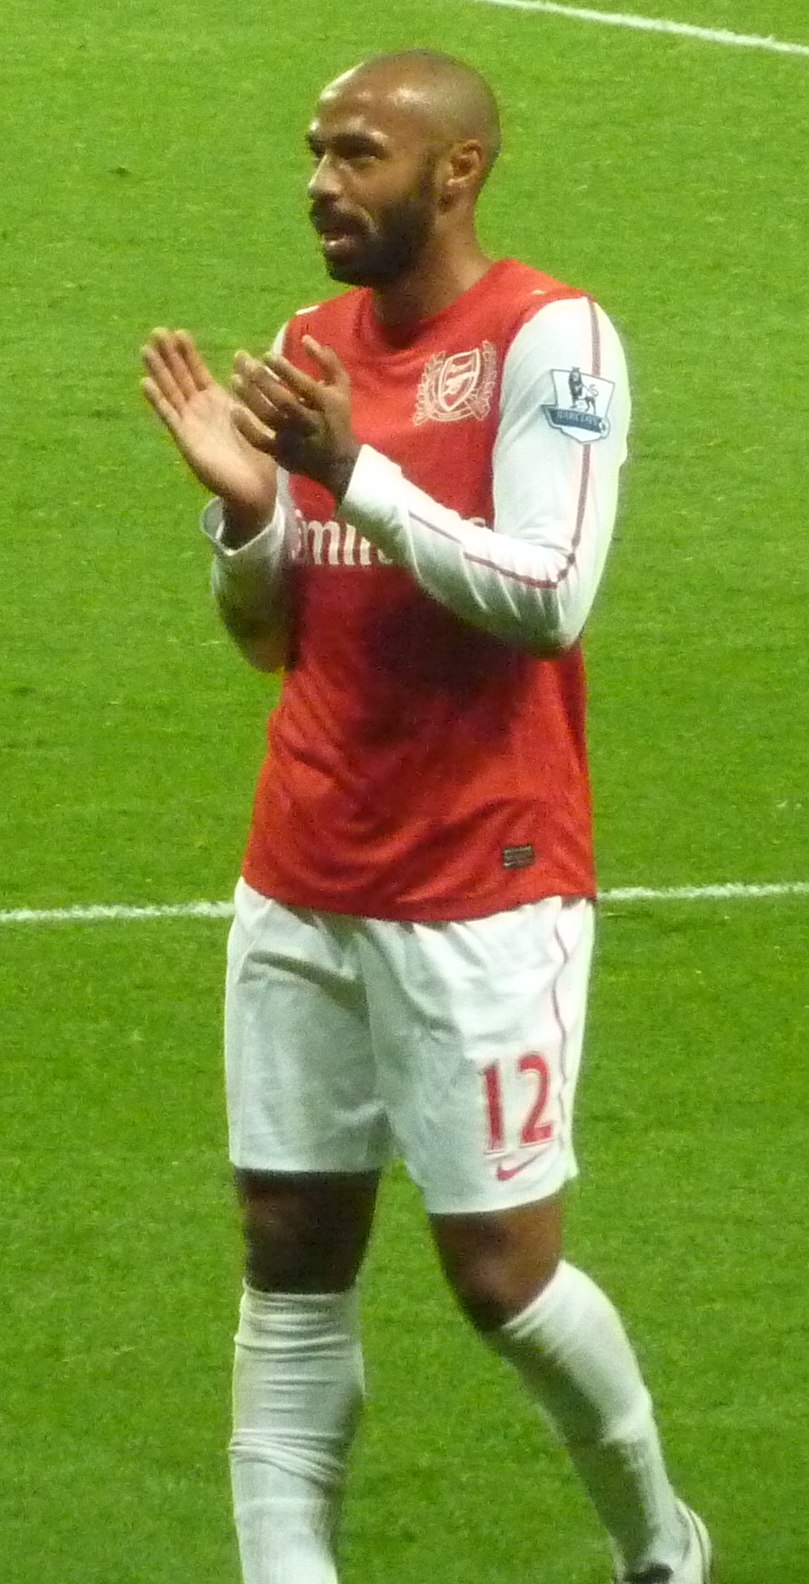 Thierry_Henry_applauding_2012